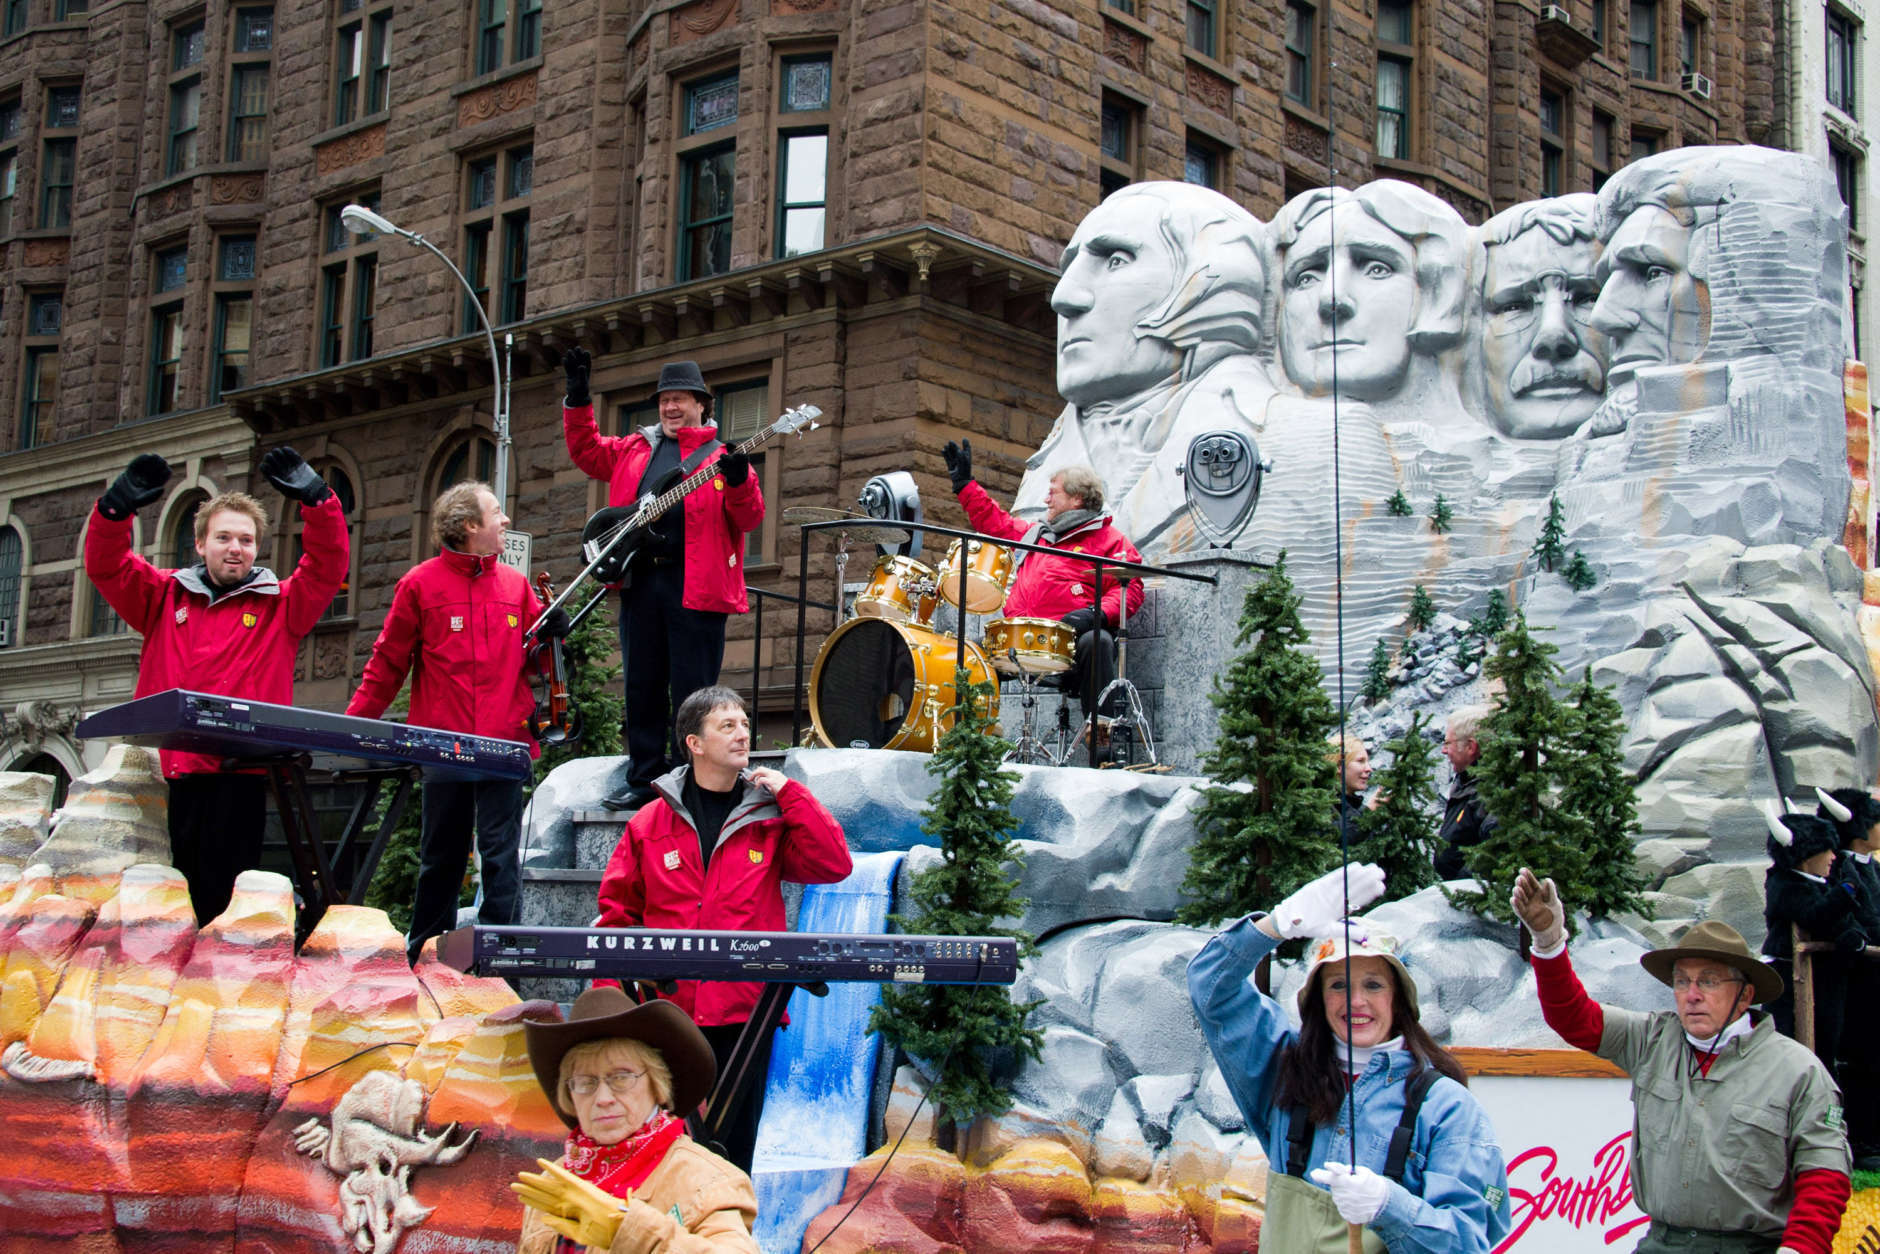 Mannheim Steamroller band in the Macy's Thanksgiving Day Parade in New York, Thursday, Nov. 25, 2010. They'll be playing at the National Christmas Tree Lighting Nov. 30. (AP Photo/Charles Sykes)